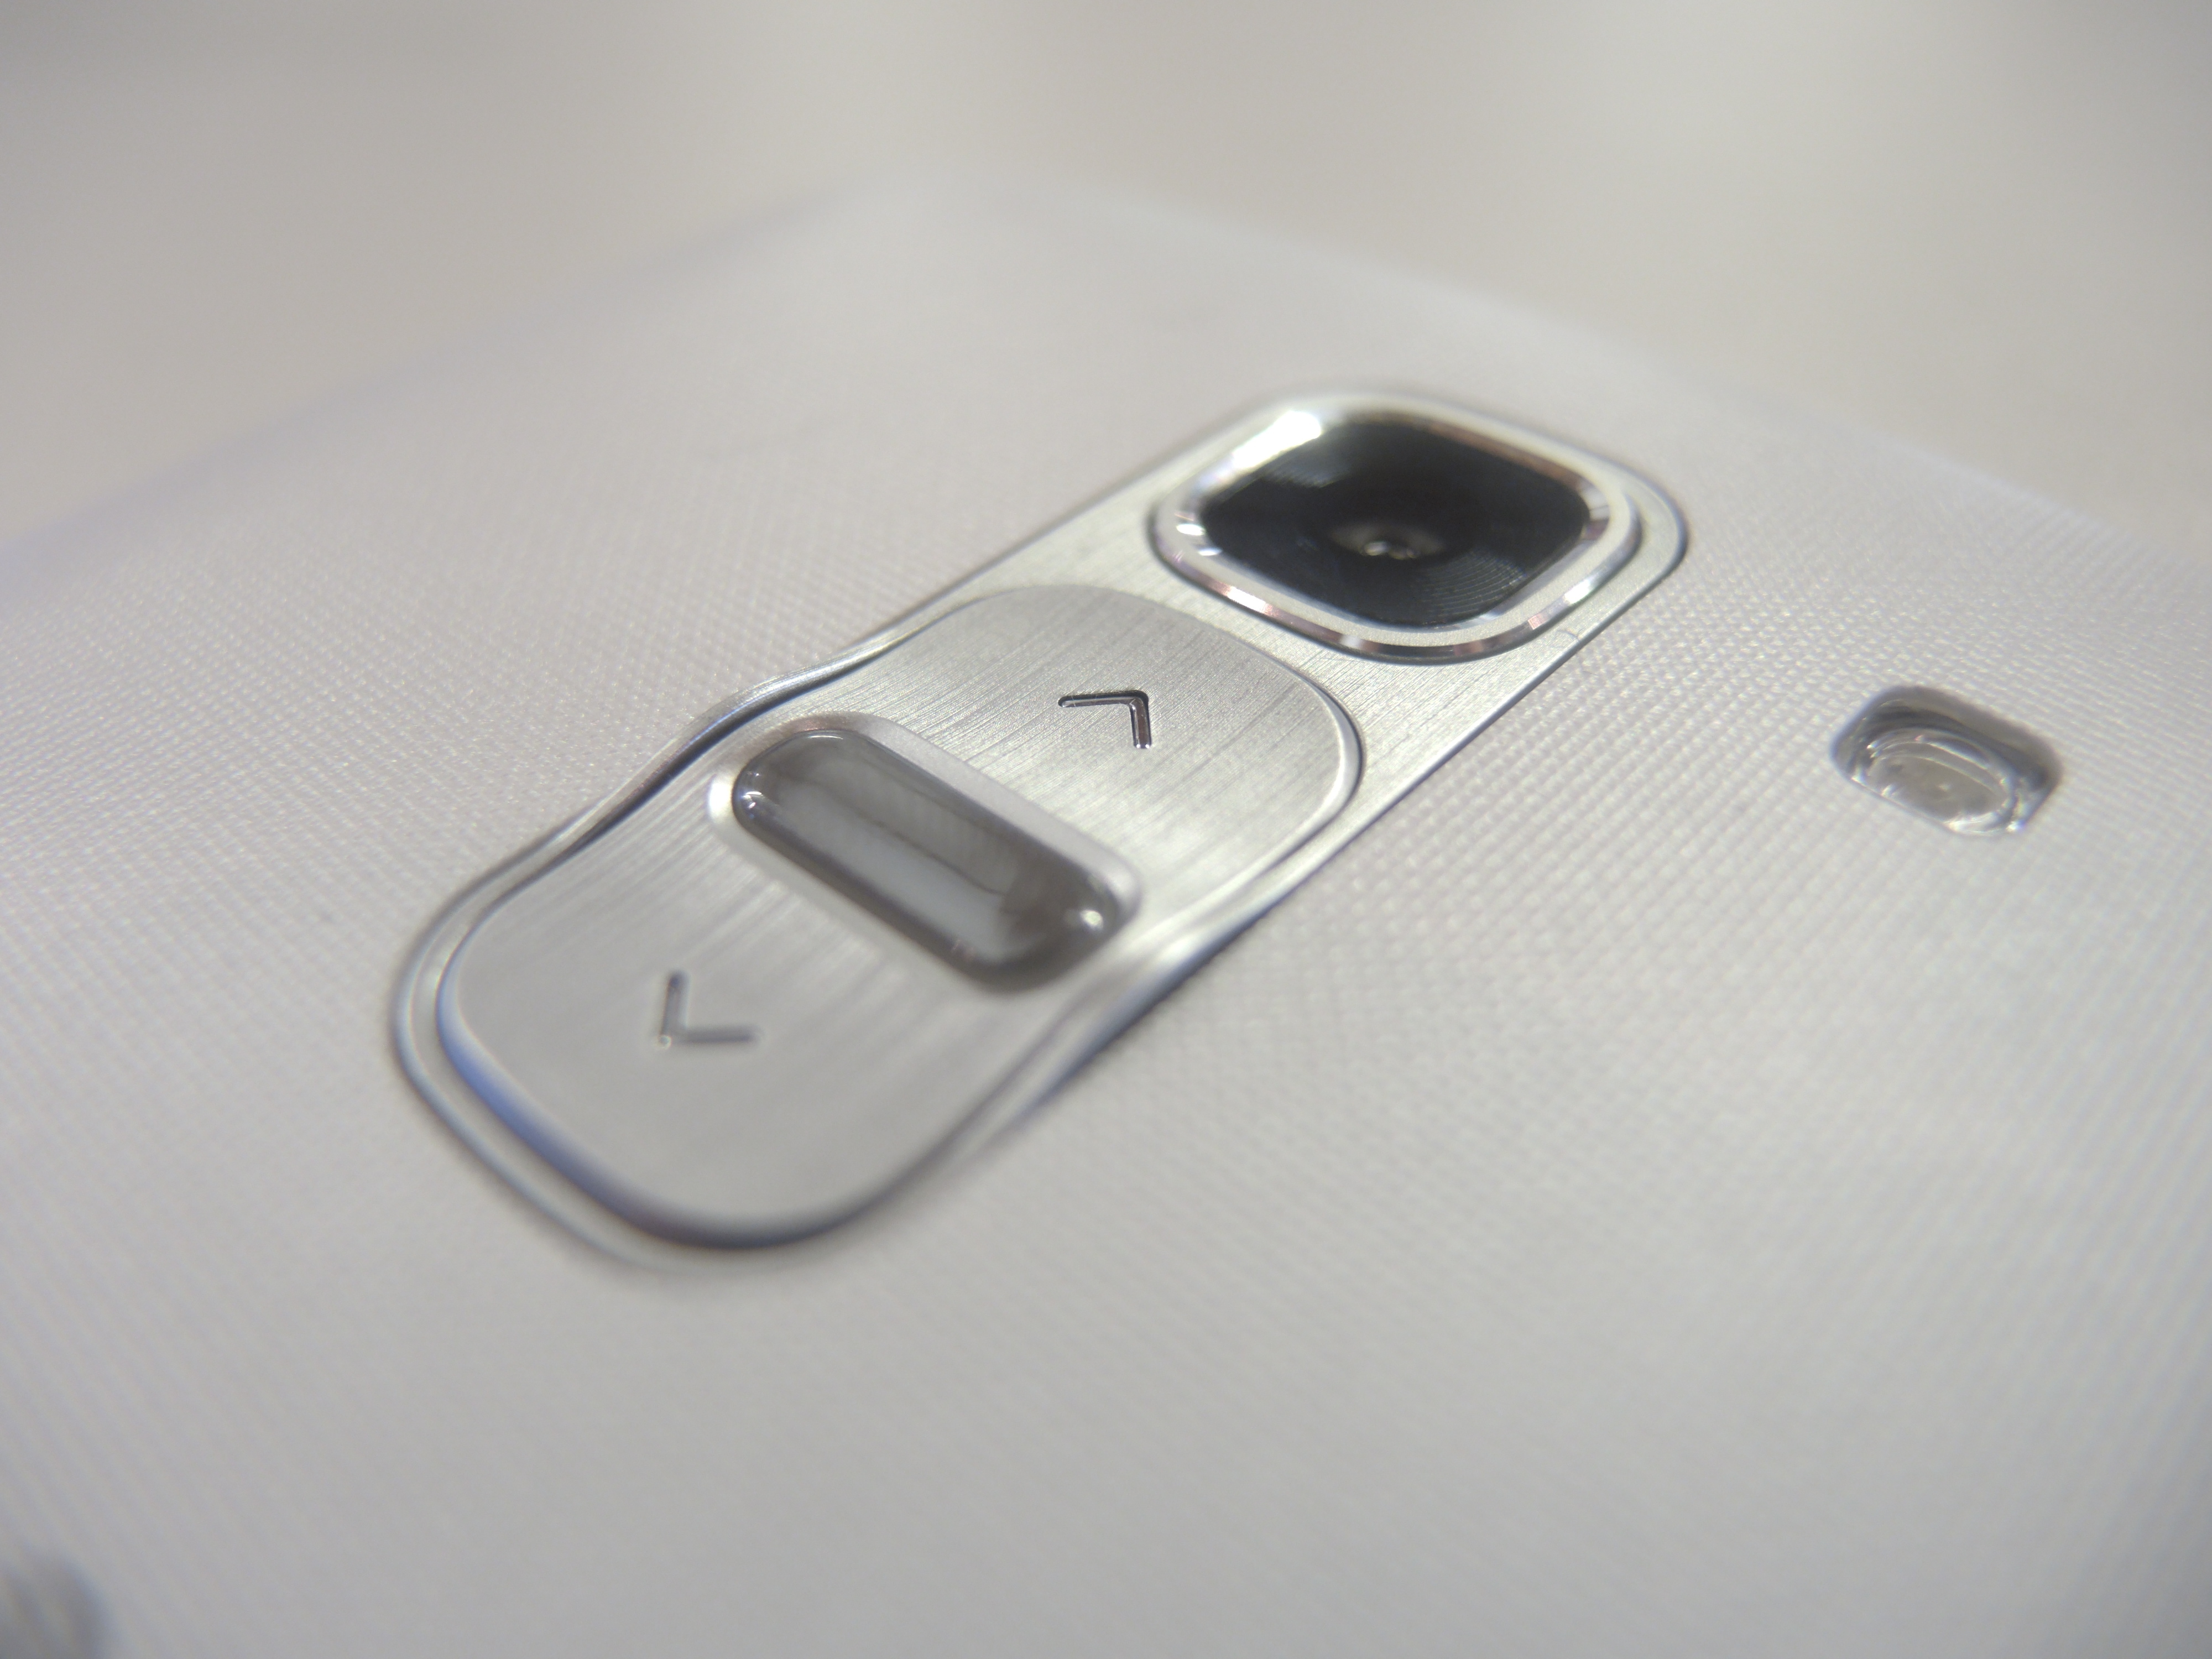 MWC 2014: LG G Pro 2 hands-on review